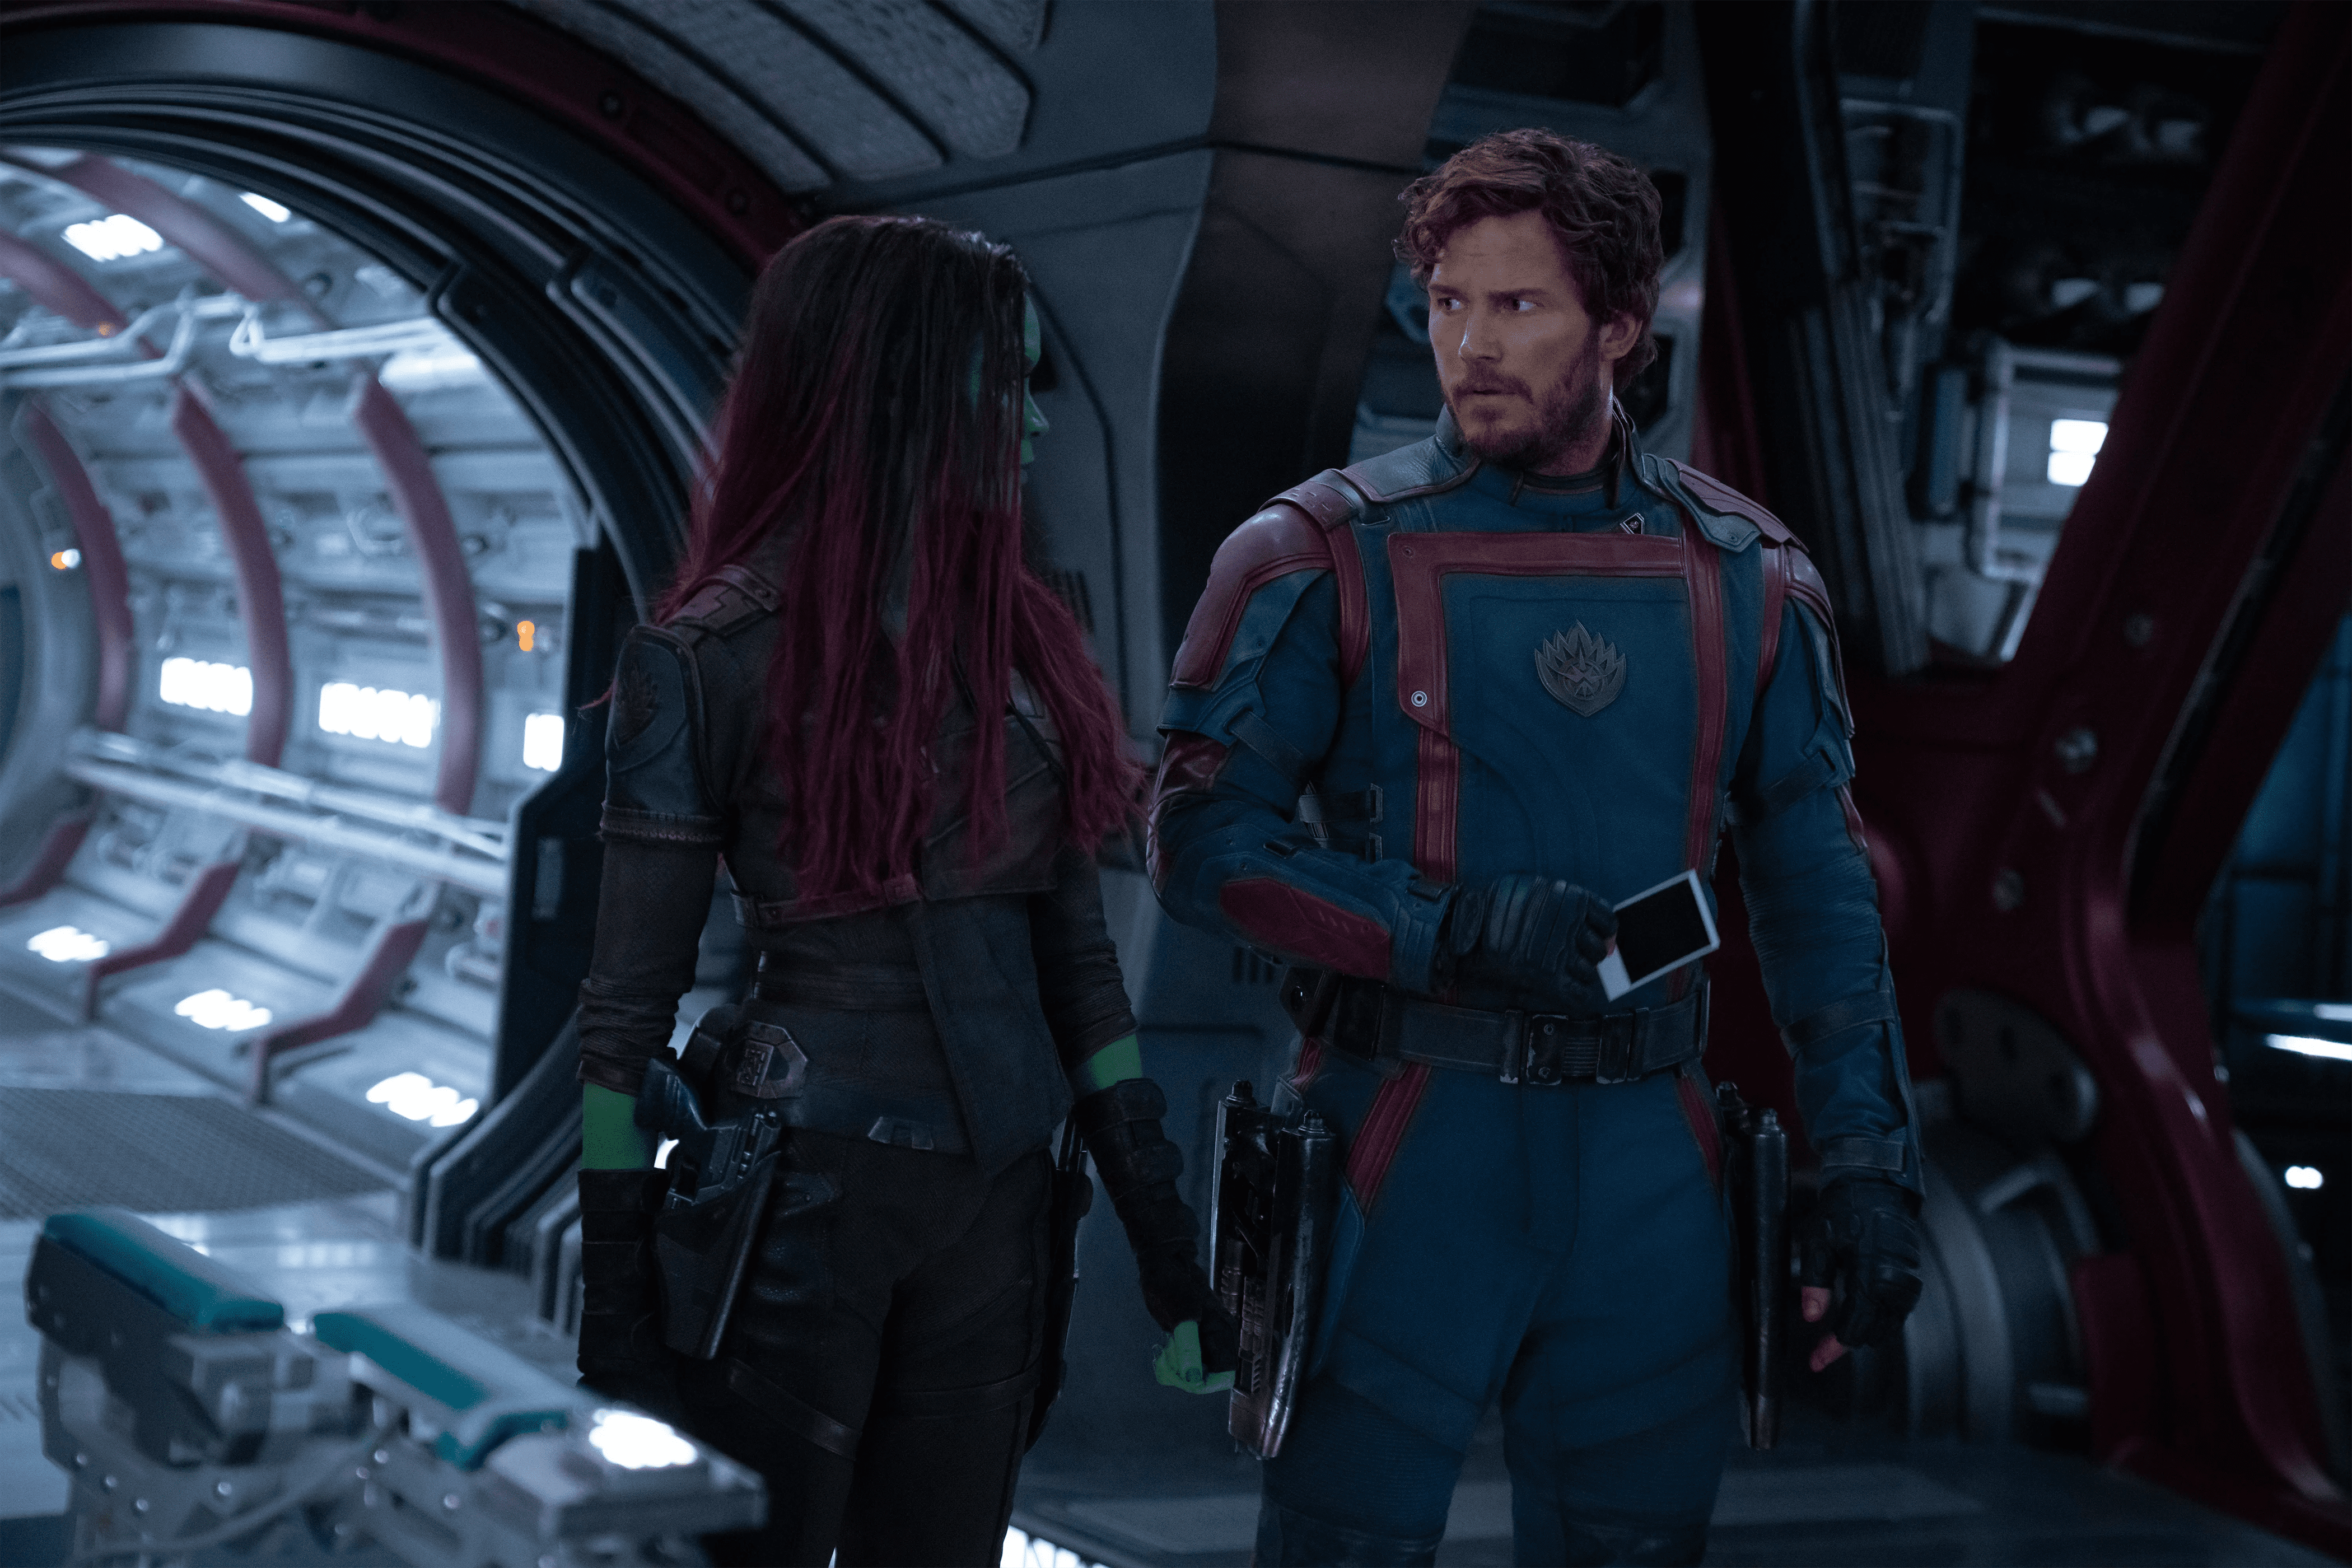 Peter Quill (Chris Pratt, right) is left reeling by the death and seeming resurrection of the love of his life, Gamora (Zoe Saldana, left). Photo courtesy of Marvel Studios